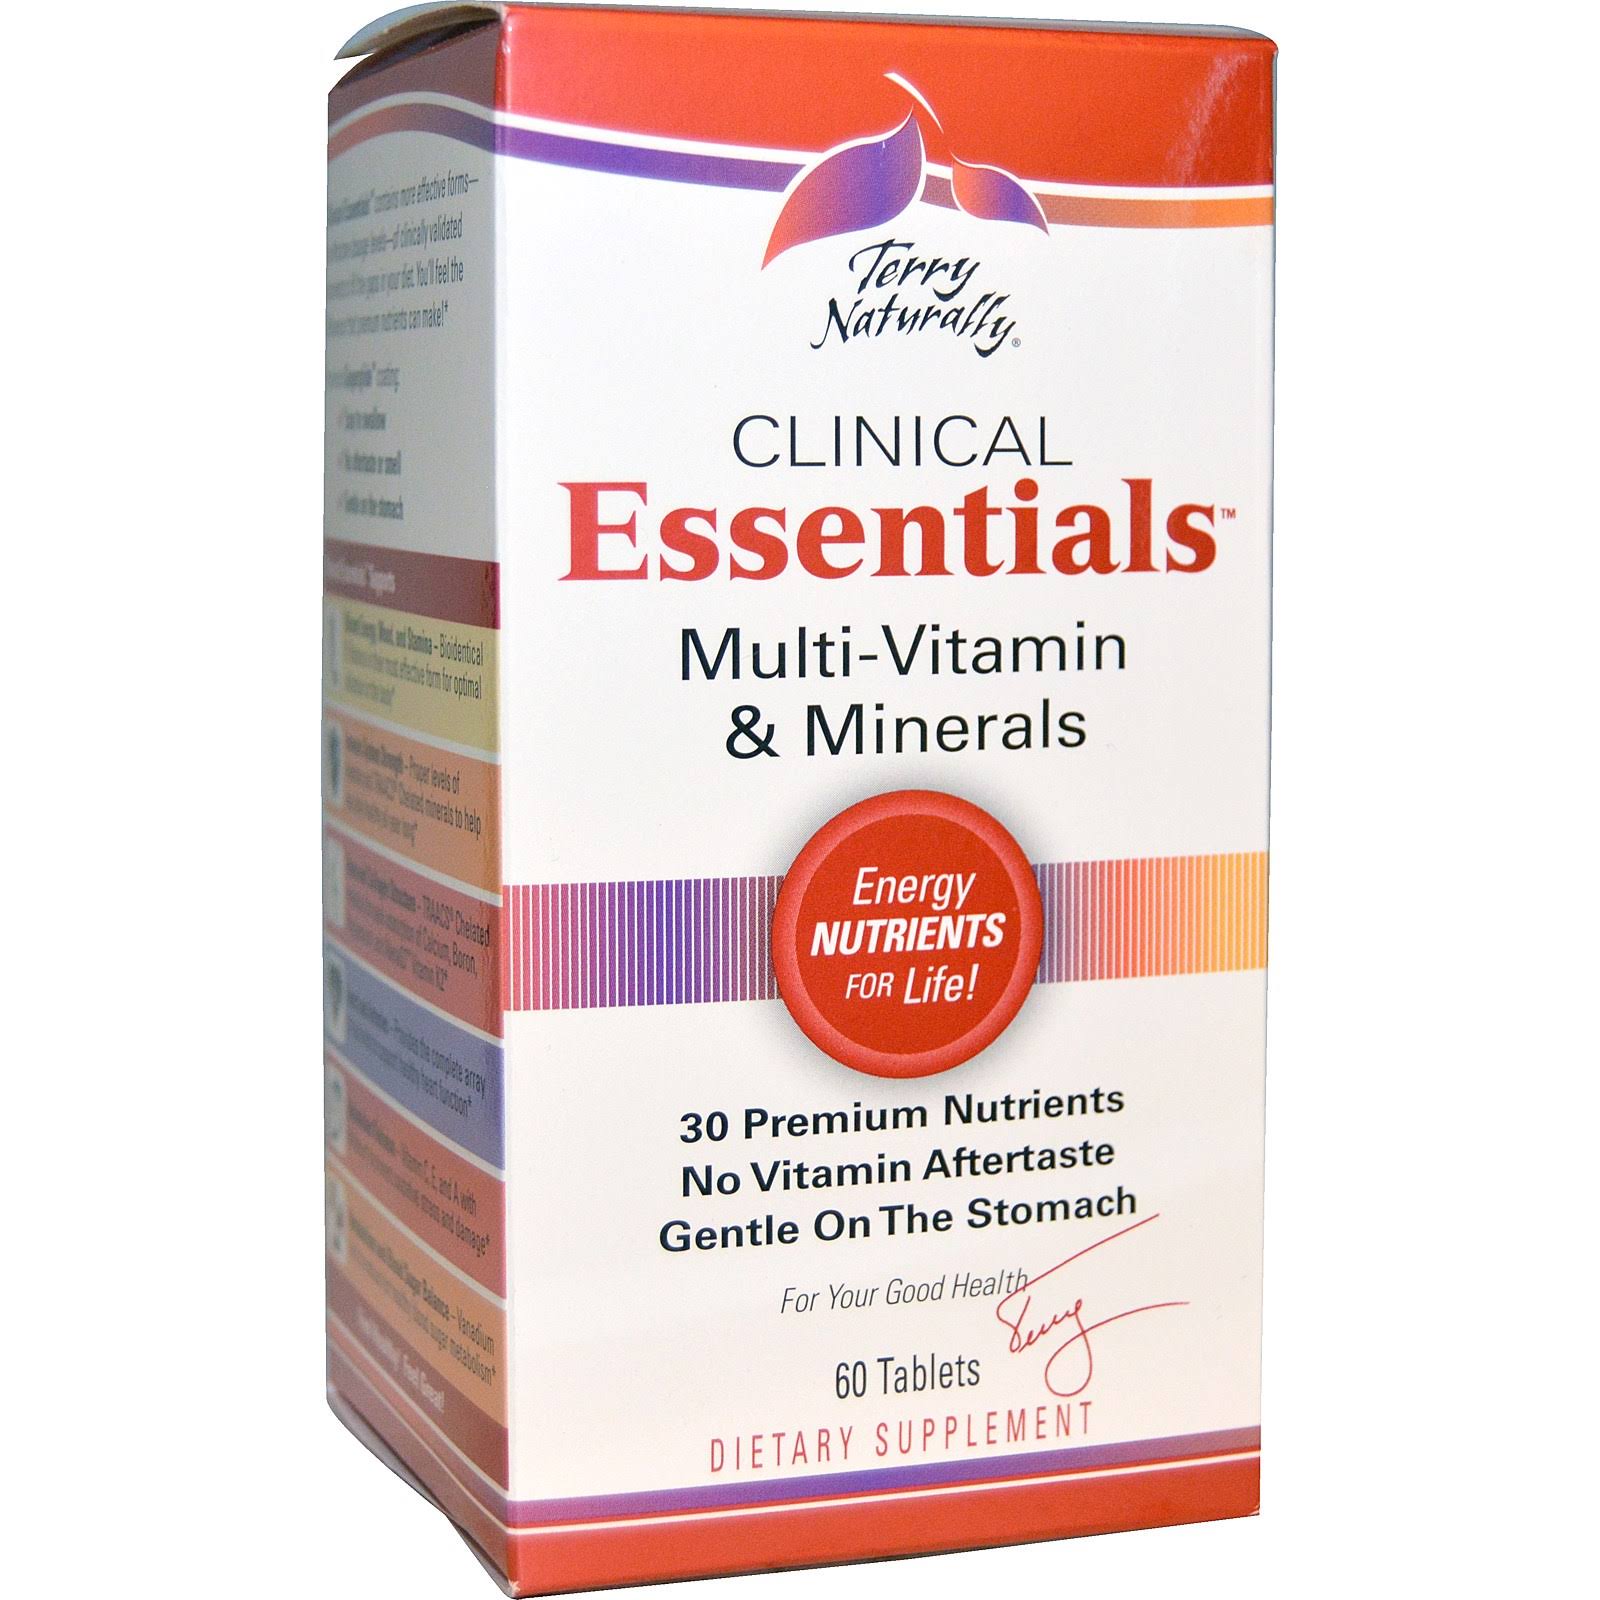 Terry Naturally Clinical Essentials